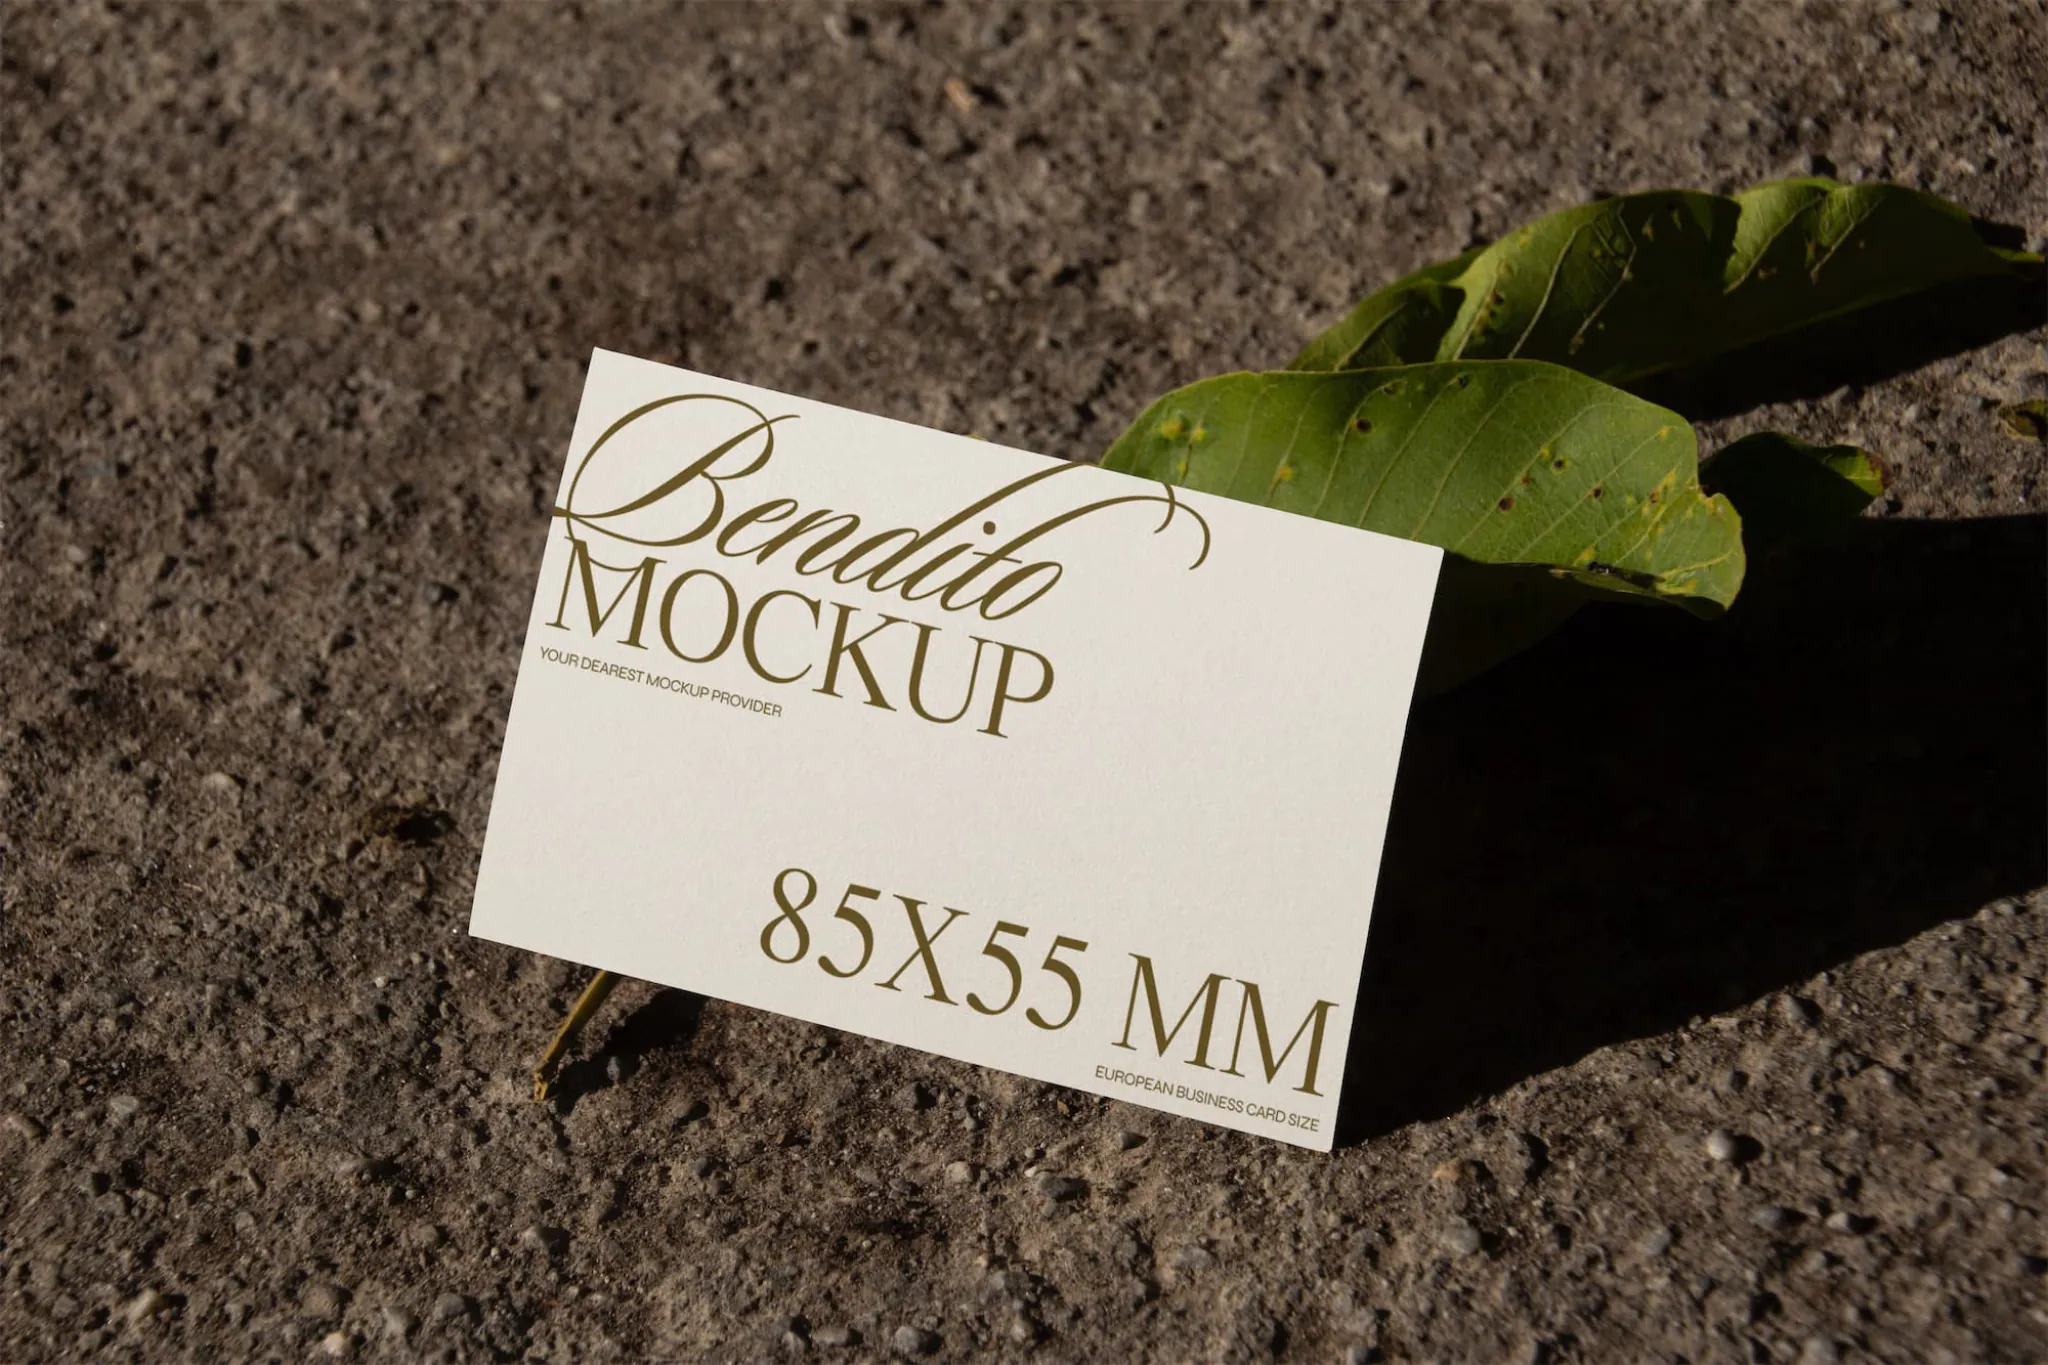 Business card mockup with natural background.